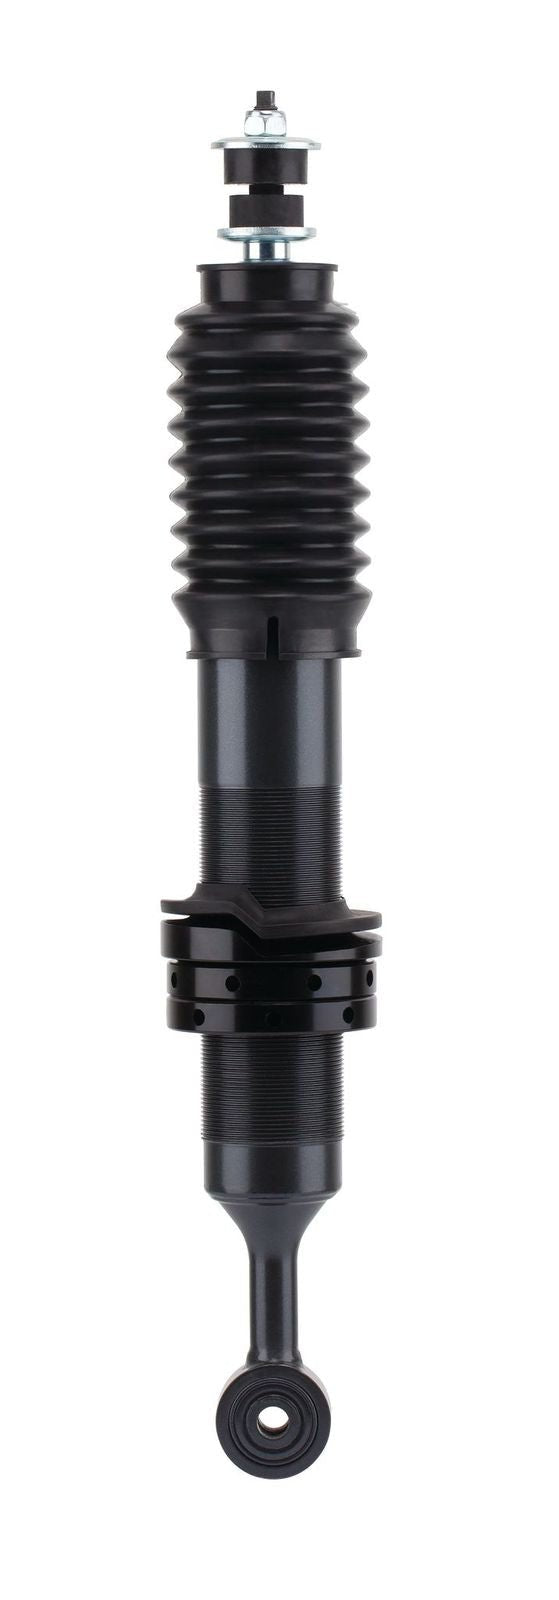 Shock Absorber - Foam Cell Pro Strut - Performance to suit LDV T60 2017+ - Mick Tighe 4x4 & Outdoor-Ironman 4x4-45745FE--Shock Absorber - Foam Cell Pro Strut - Performance to suit LDV T60 2017+